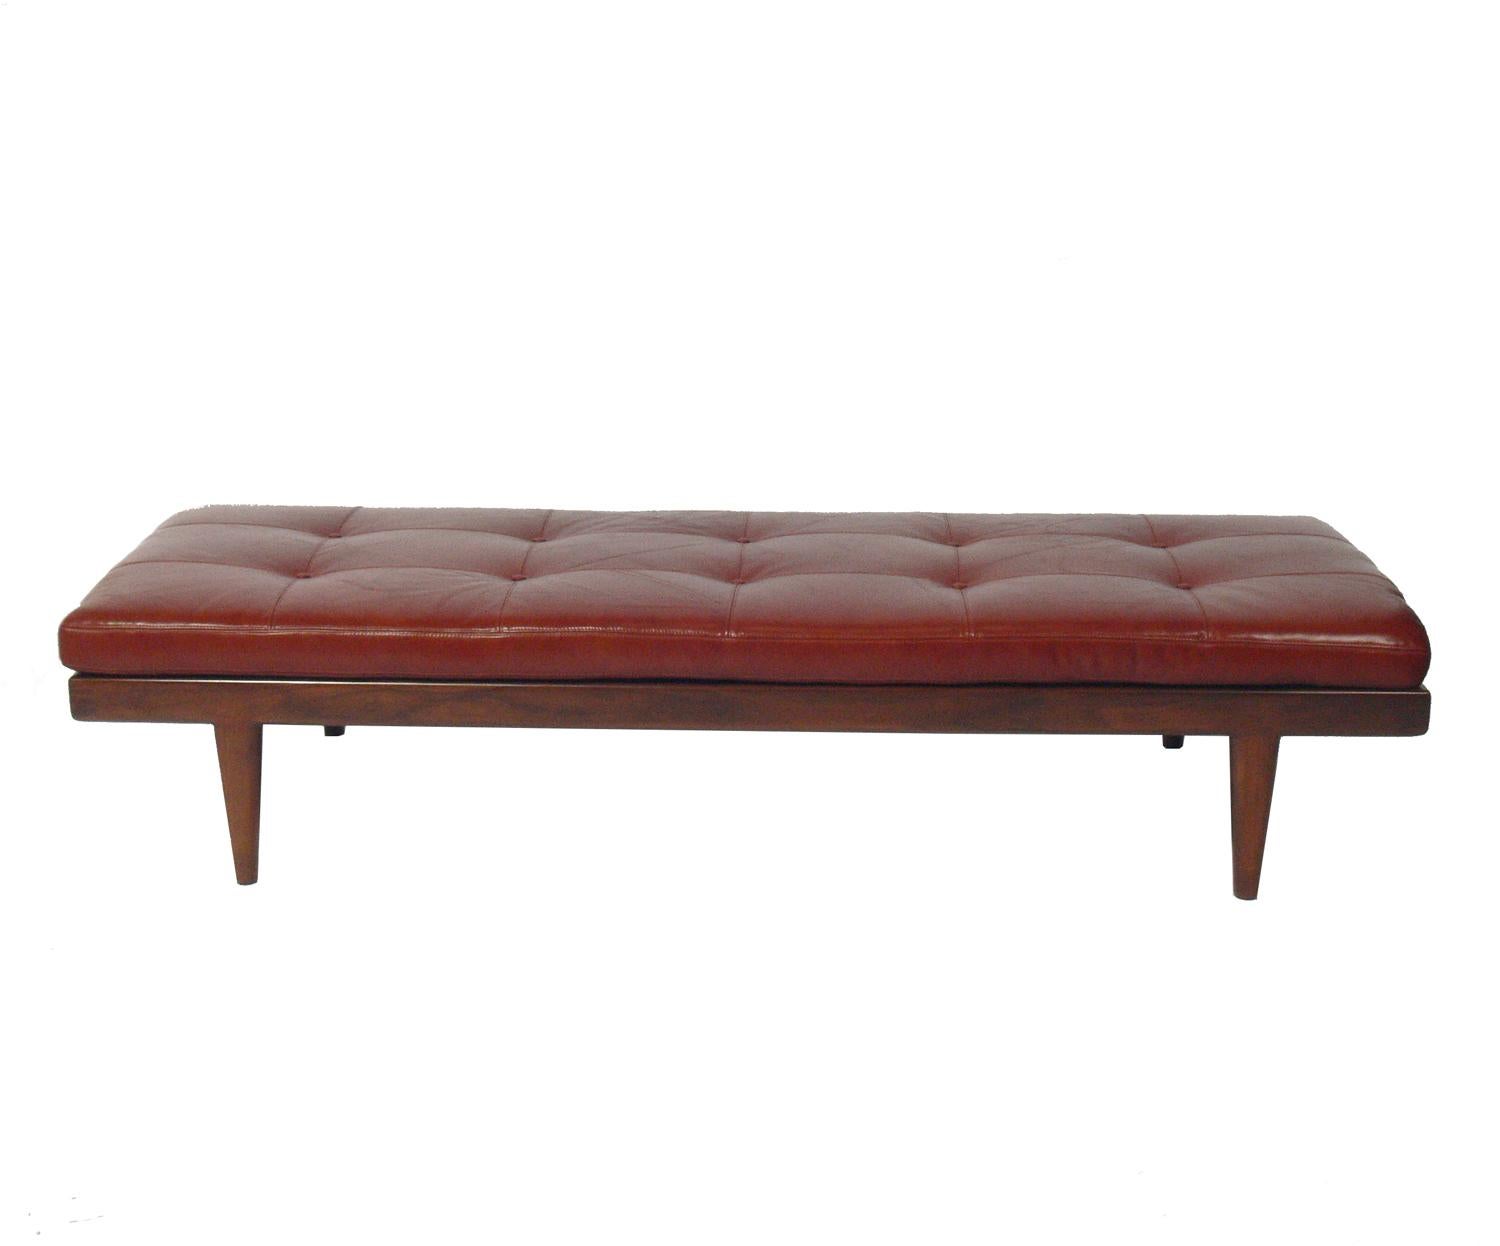 Walnut and cognac leather daybed, American, circa 2000s. Beautiful joinery and construction. It was made circa 2008 and has seen very little use.